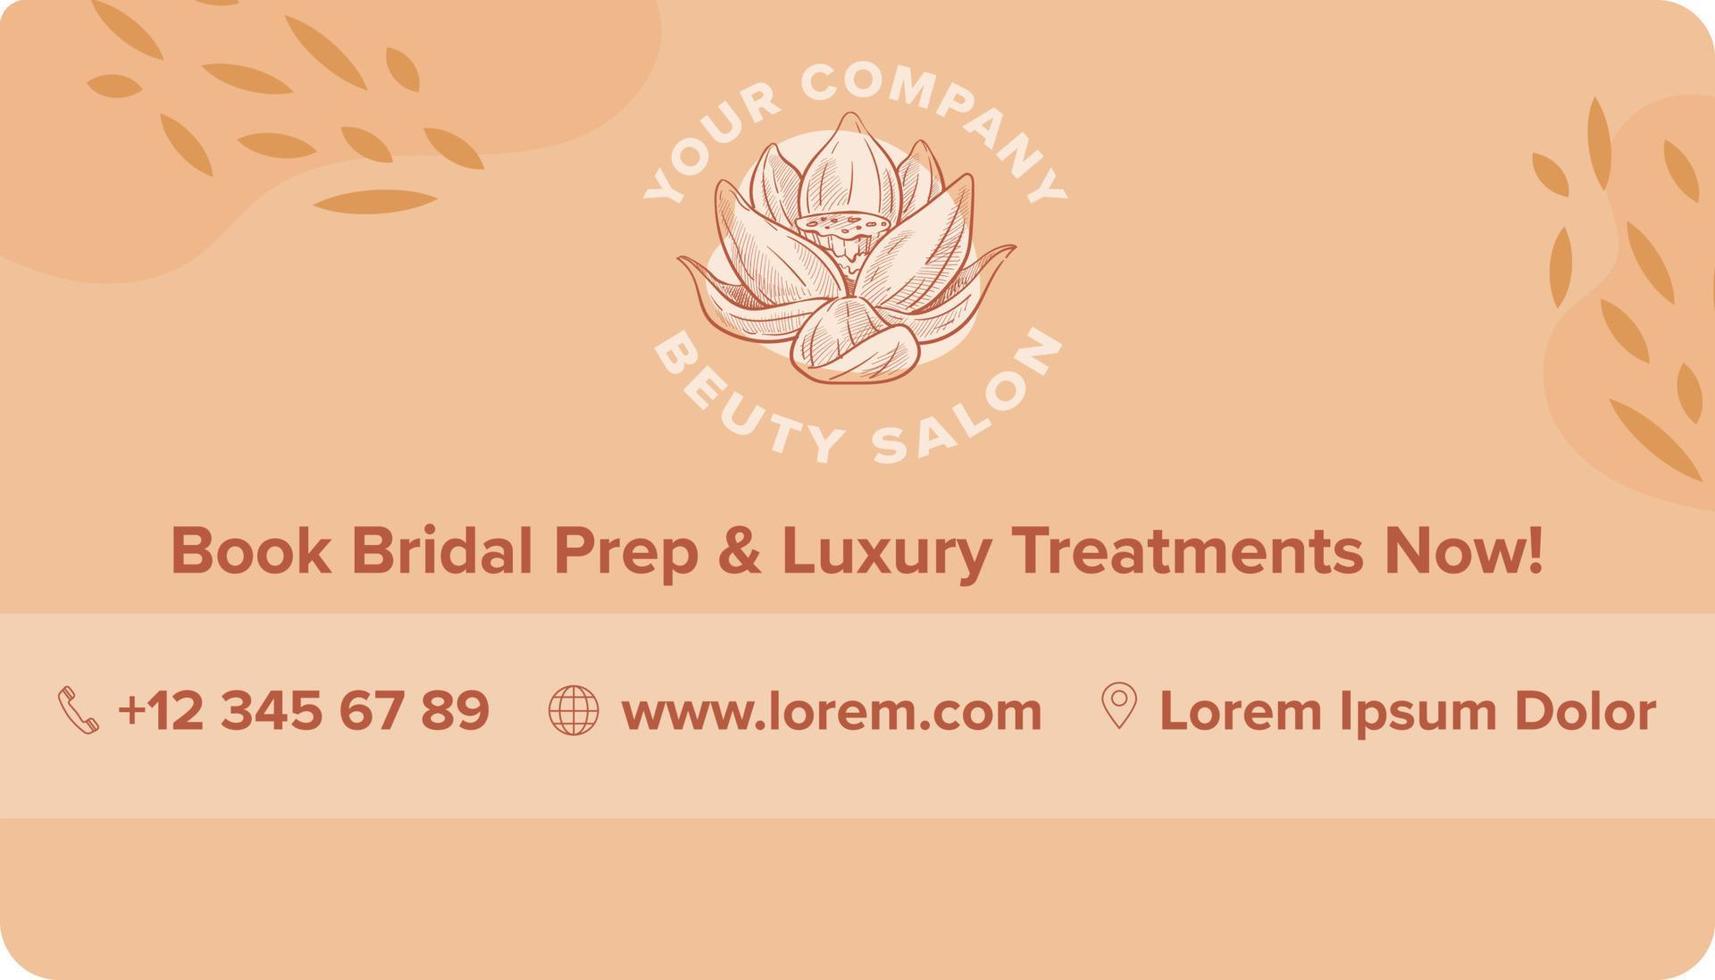 Book bridal prep and luxury treatments now, card vector